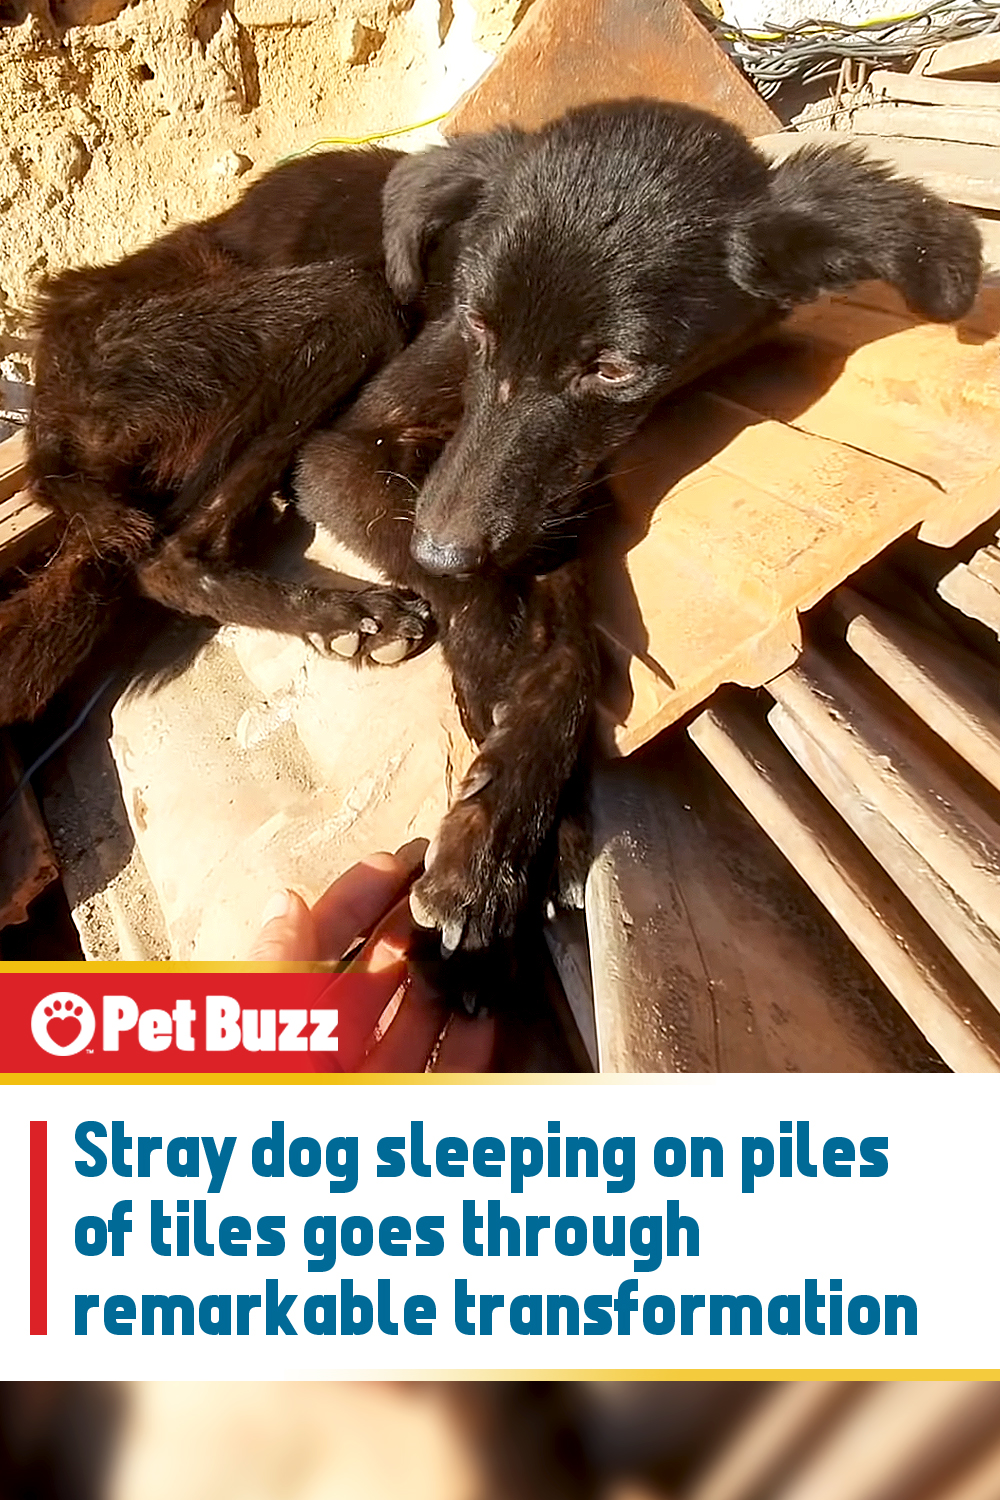 Stray dog sleeping on piles of tiles goes through remarkable transformation